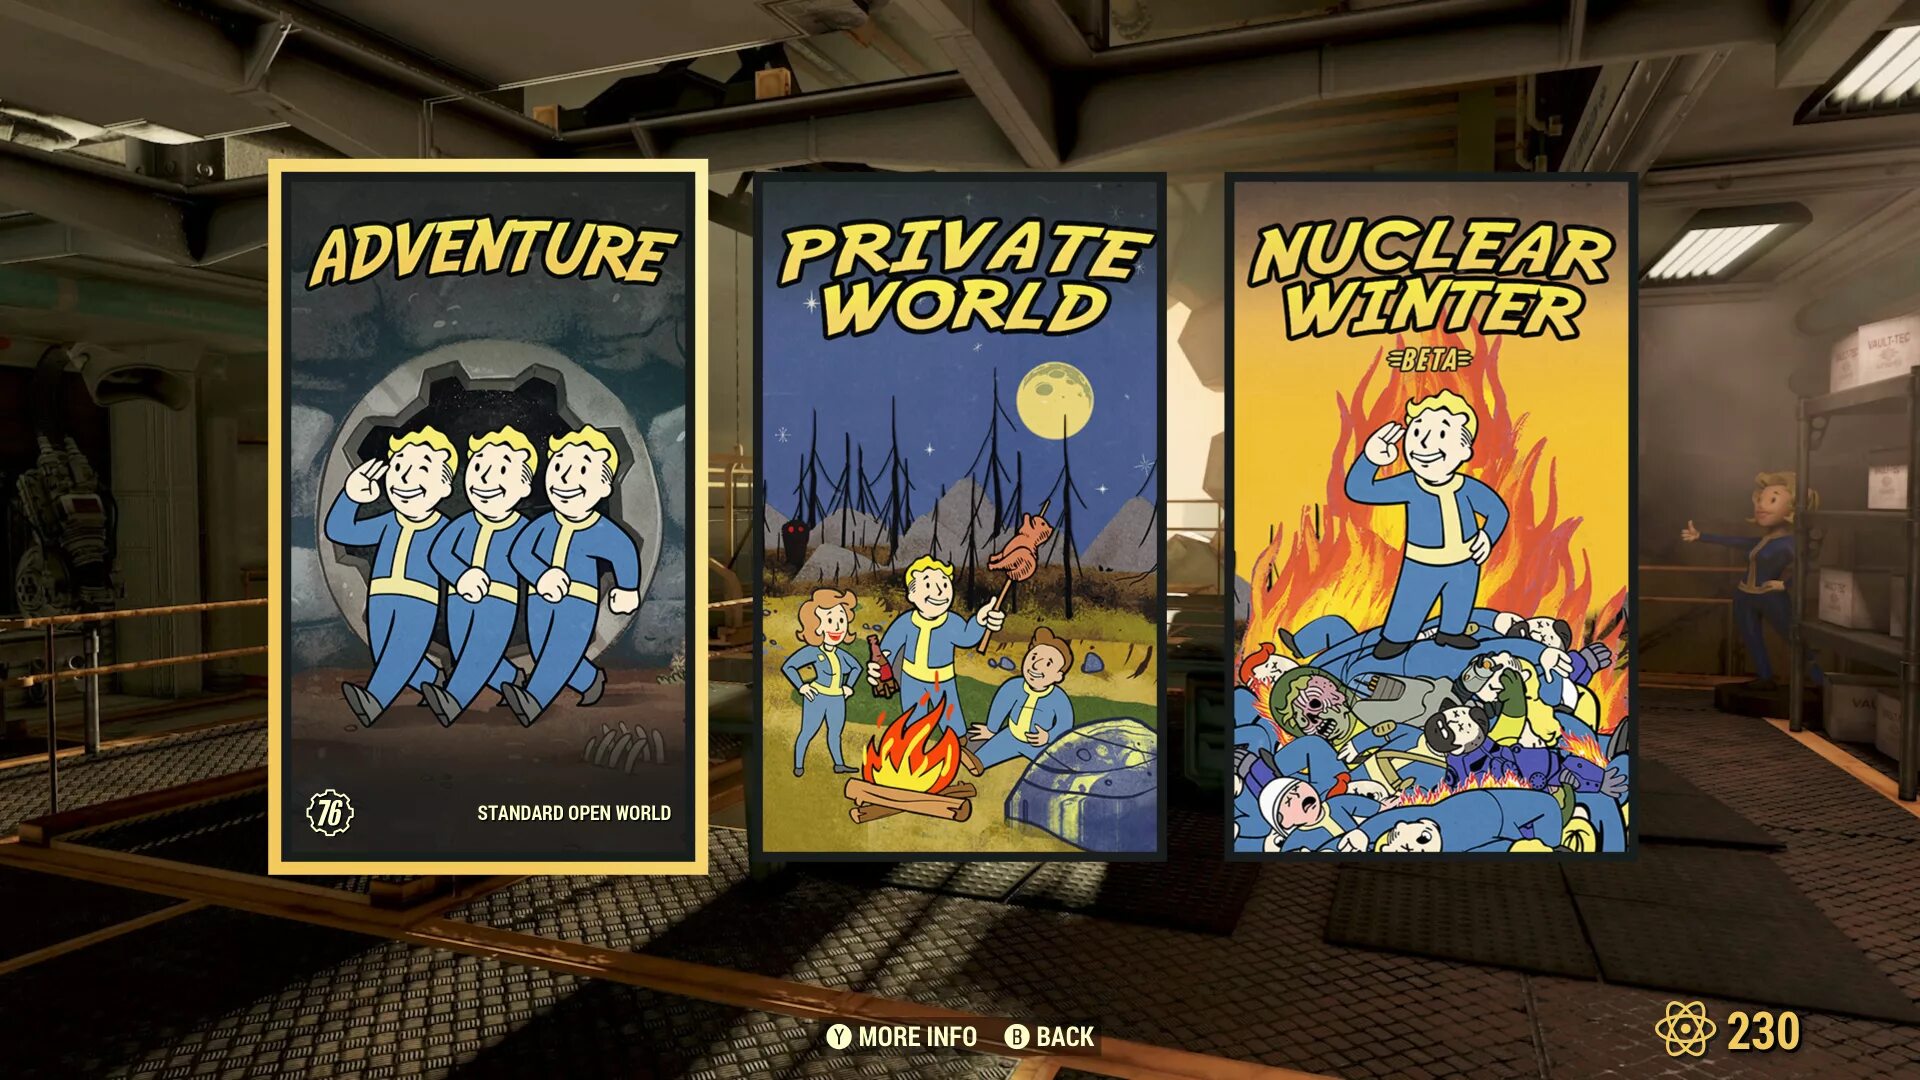 Private worlds. Fallout 76 игровое поле. Fallout 76 nuclear Winter. Fallout 76 обложка. Новое игровое поле фоллаут 76.